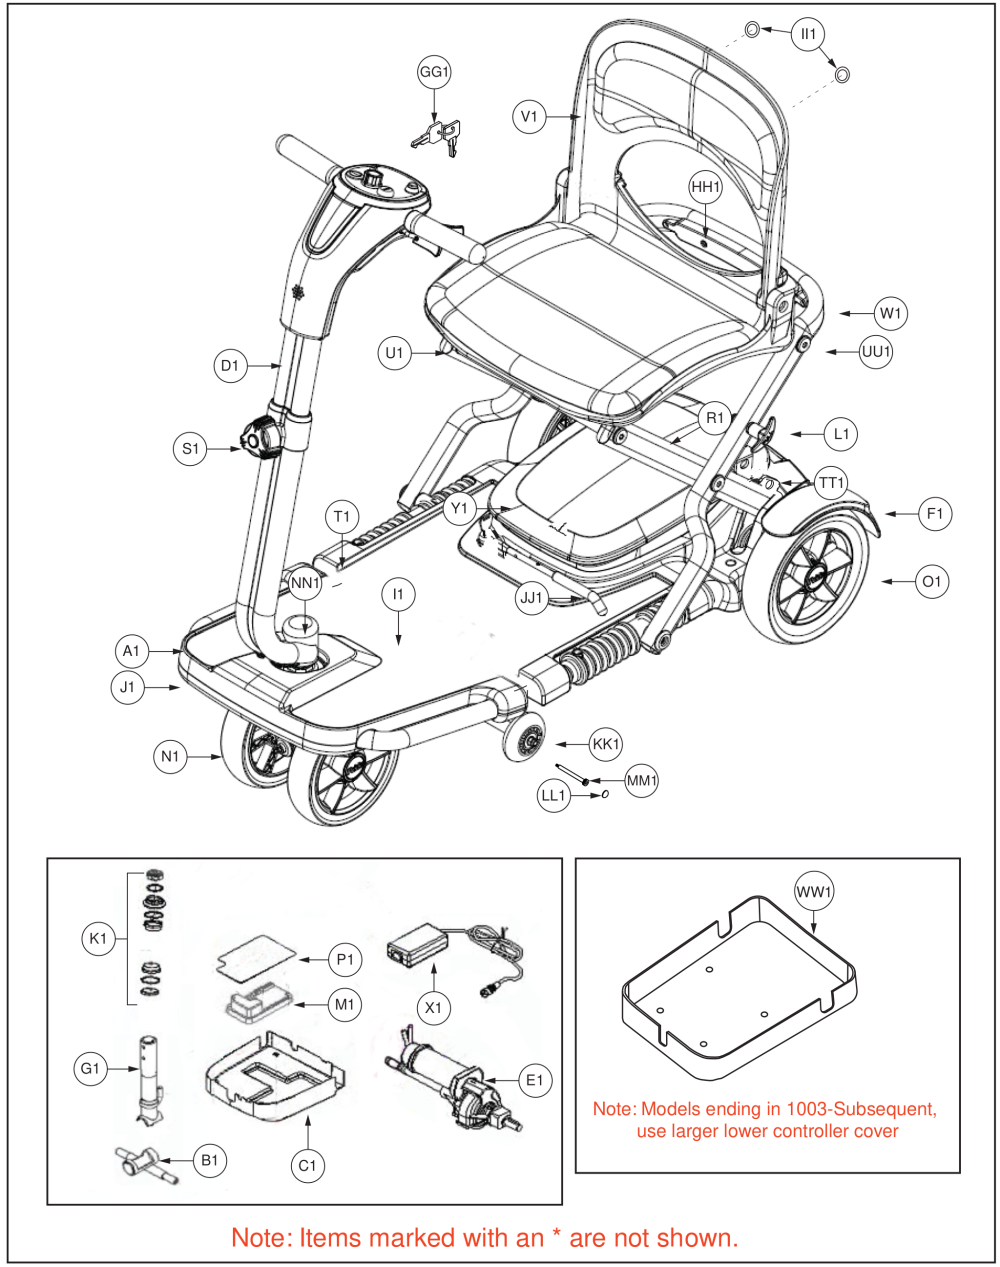 Folding Scooter W/12 Amp Battery Pack, Gogo S19 parts diagram